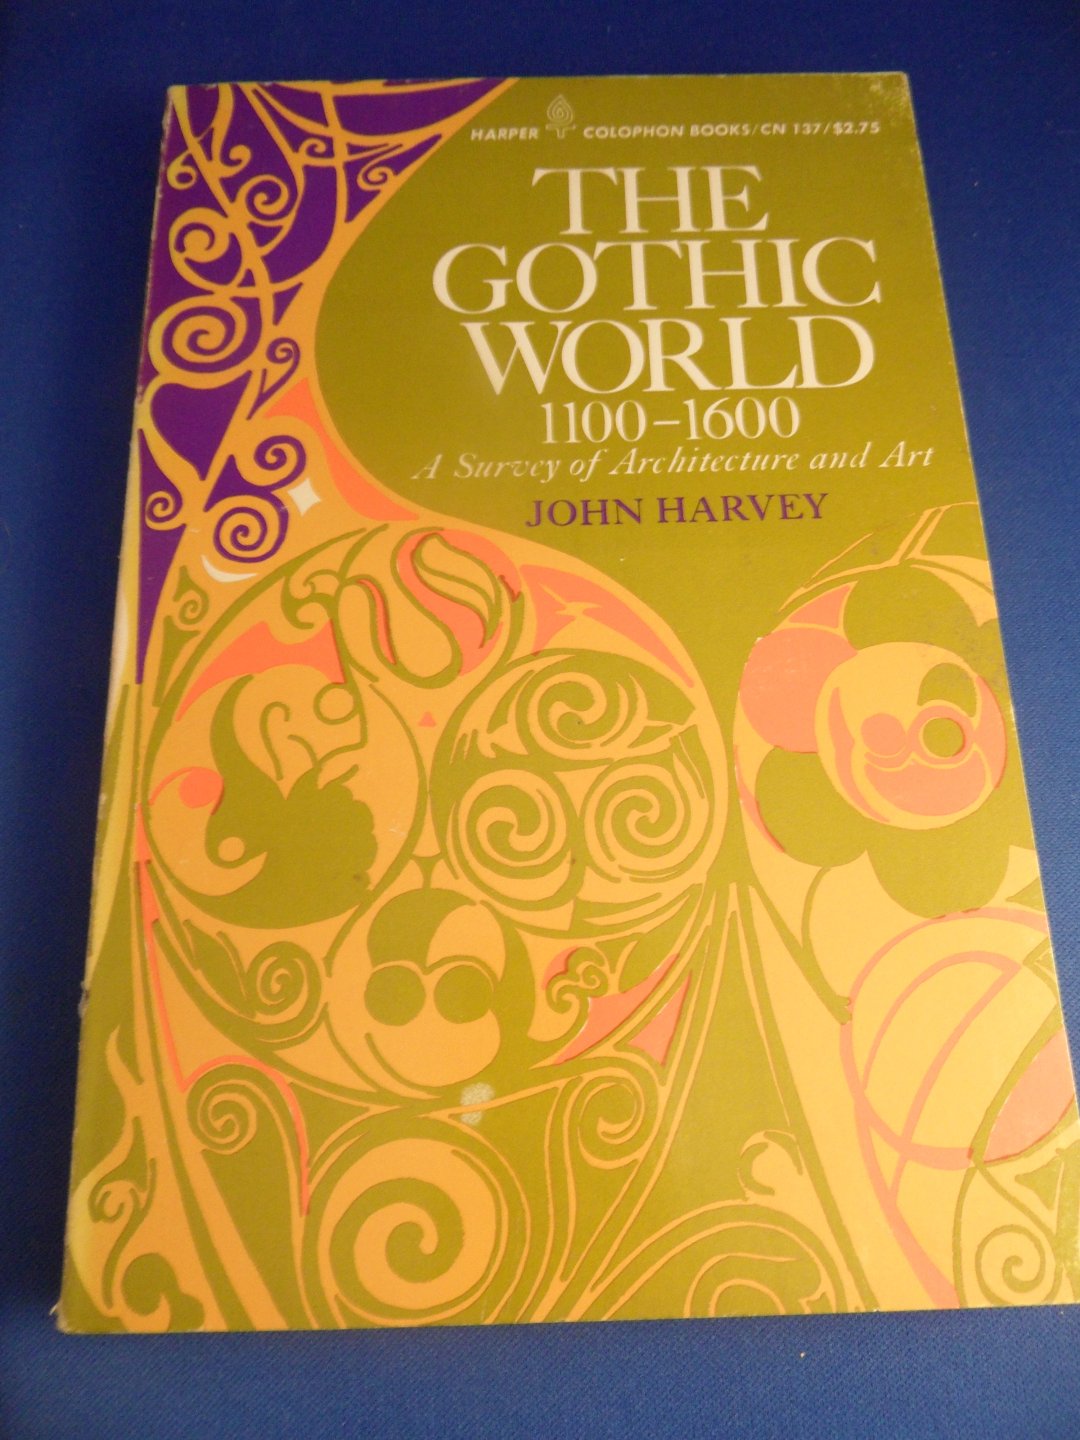 Harvey, John - The Gothic world, 1100-1600. A survey of architecture and art